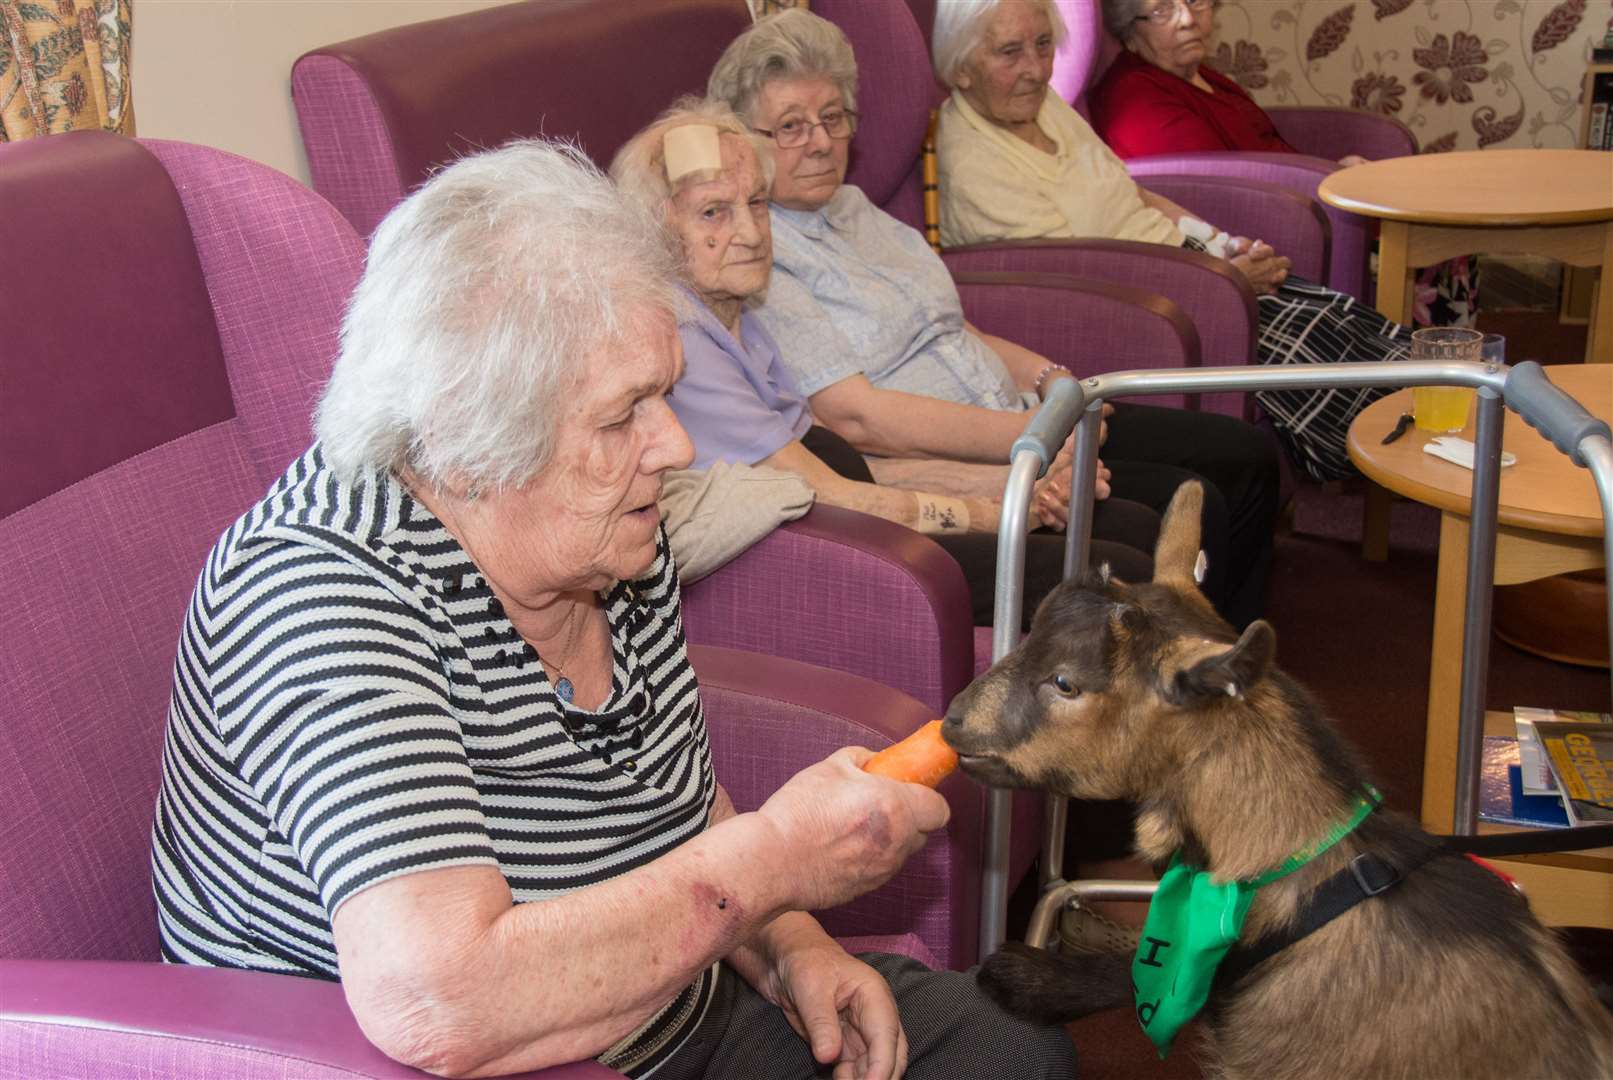 Isabella Merritt feeds pygmy goats Bill and Ed at Meadows care home in Huntly. Picture: Becky Saunderson. Image No. 044507.